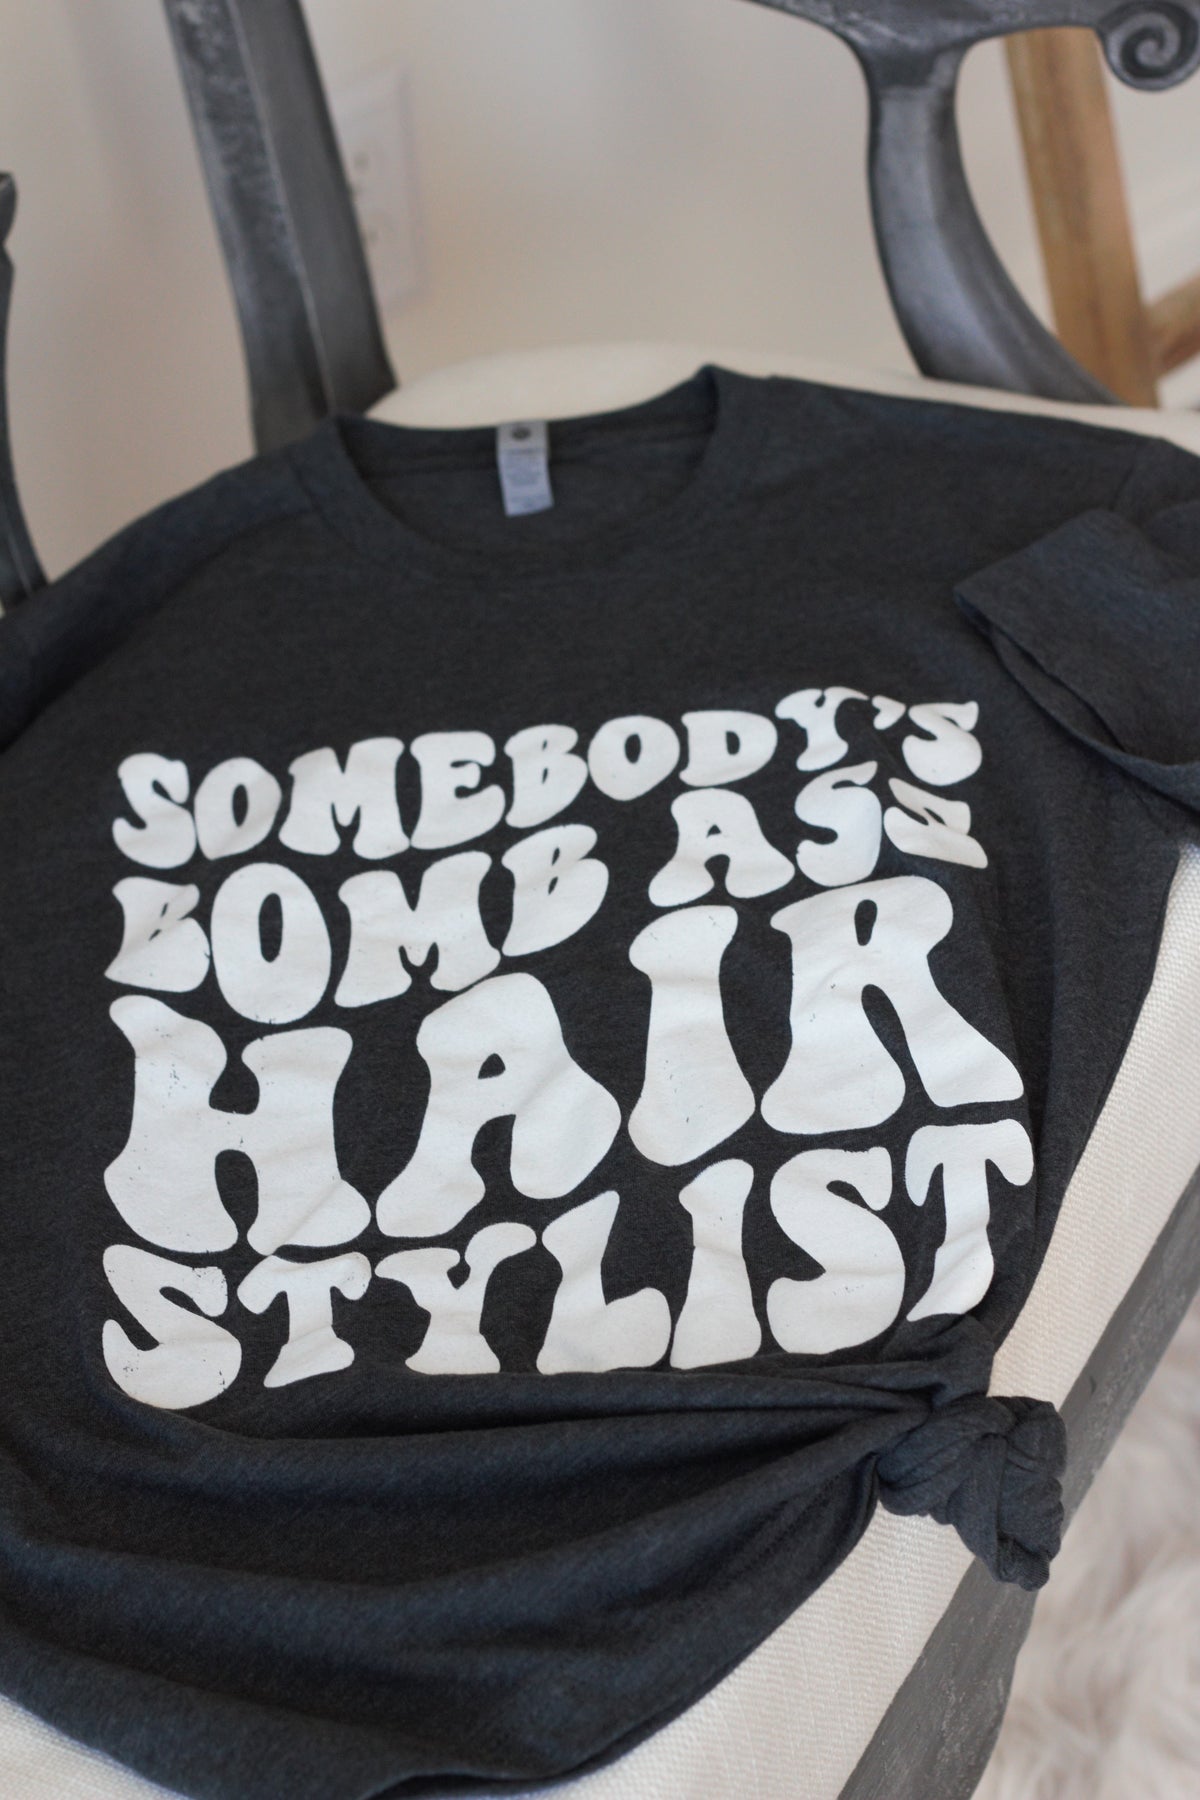 Somebody's Bomb Ass Hair Stylist GraphicTee